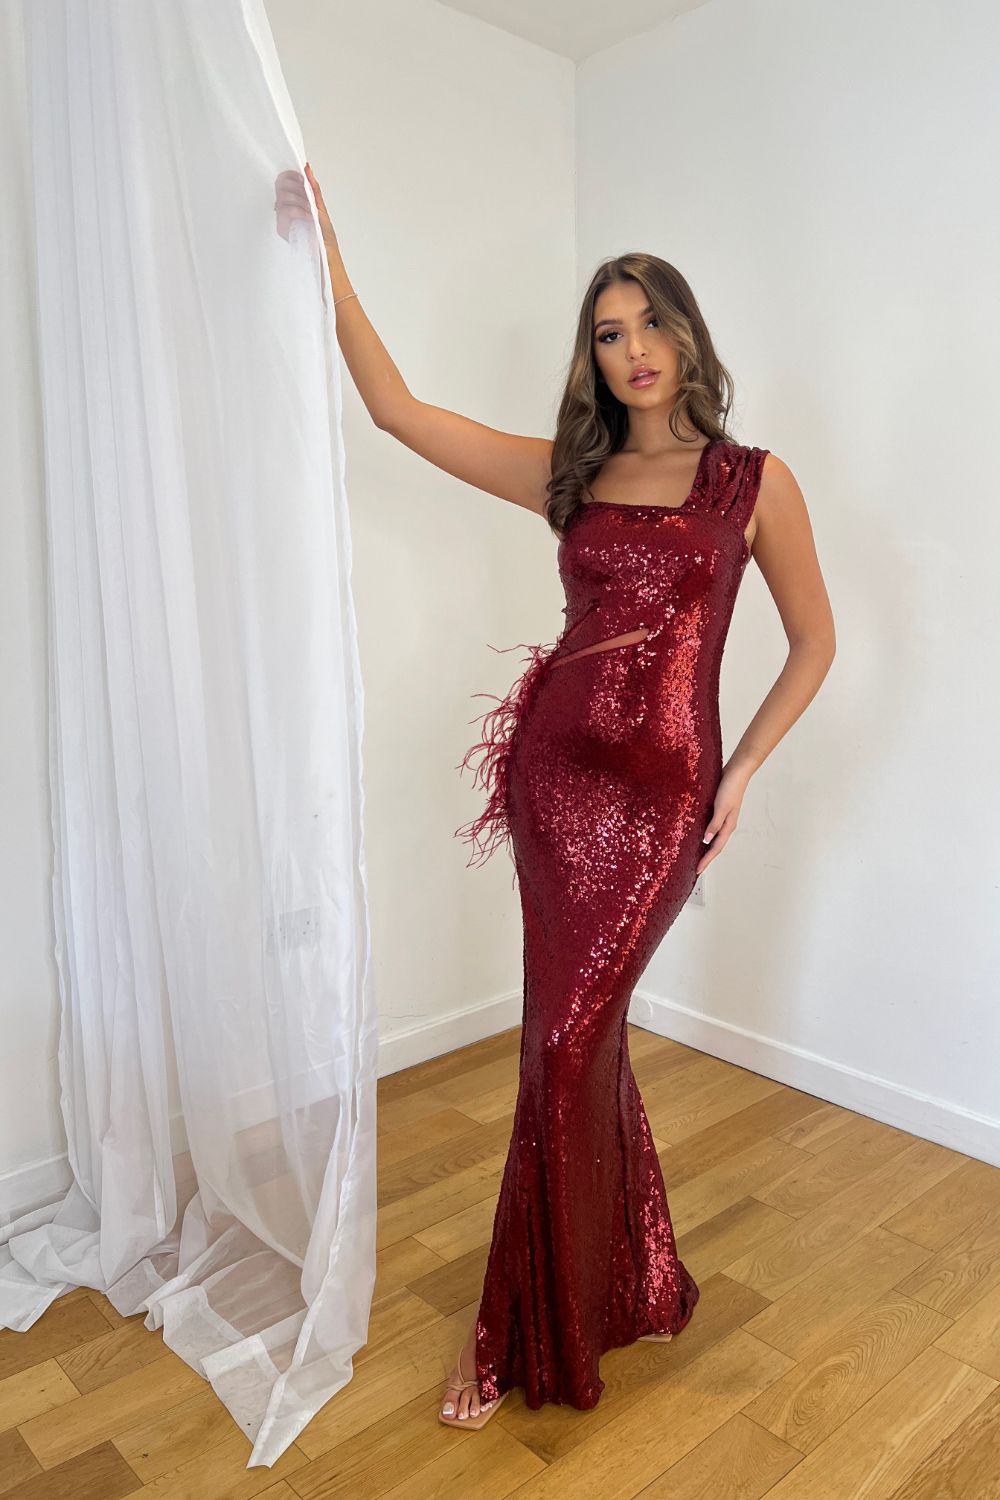 Fame Berry Luxe Feather One Shoulder Sequin Illusion Slit Maxi Dress